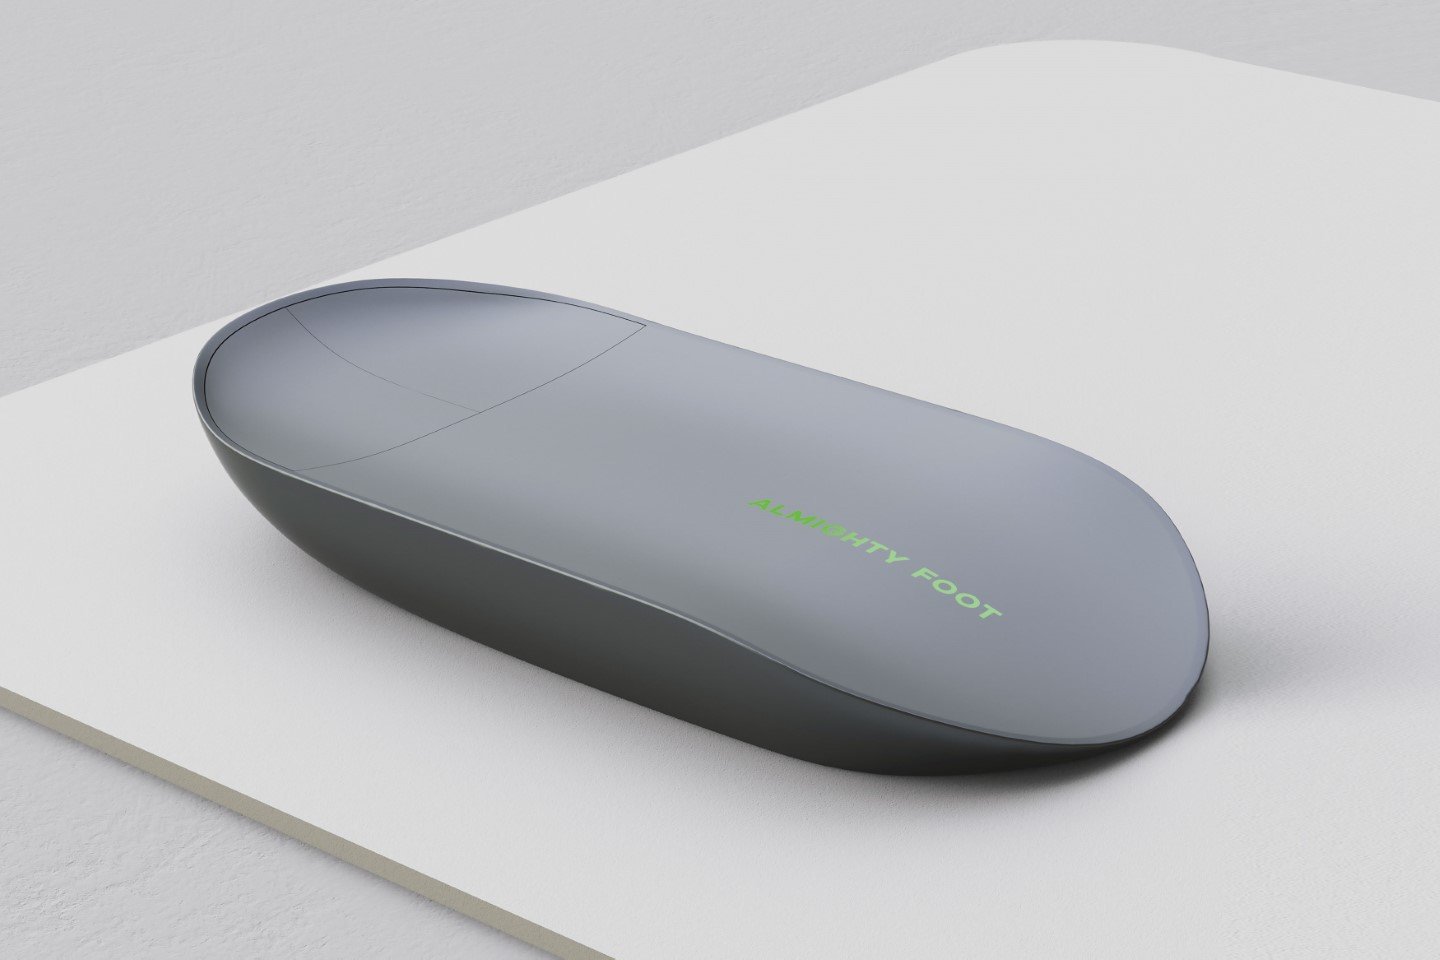 #Foot-operated computer mouse design wins the Red Dot Award for its unique approach to accessibility